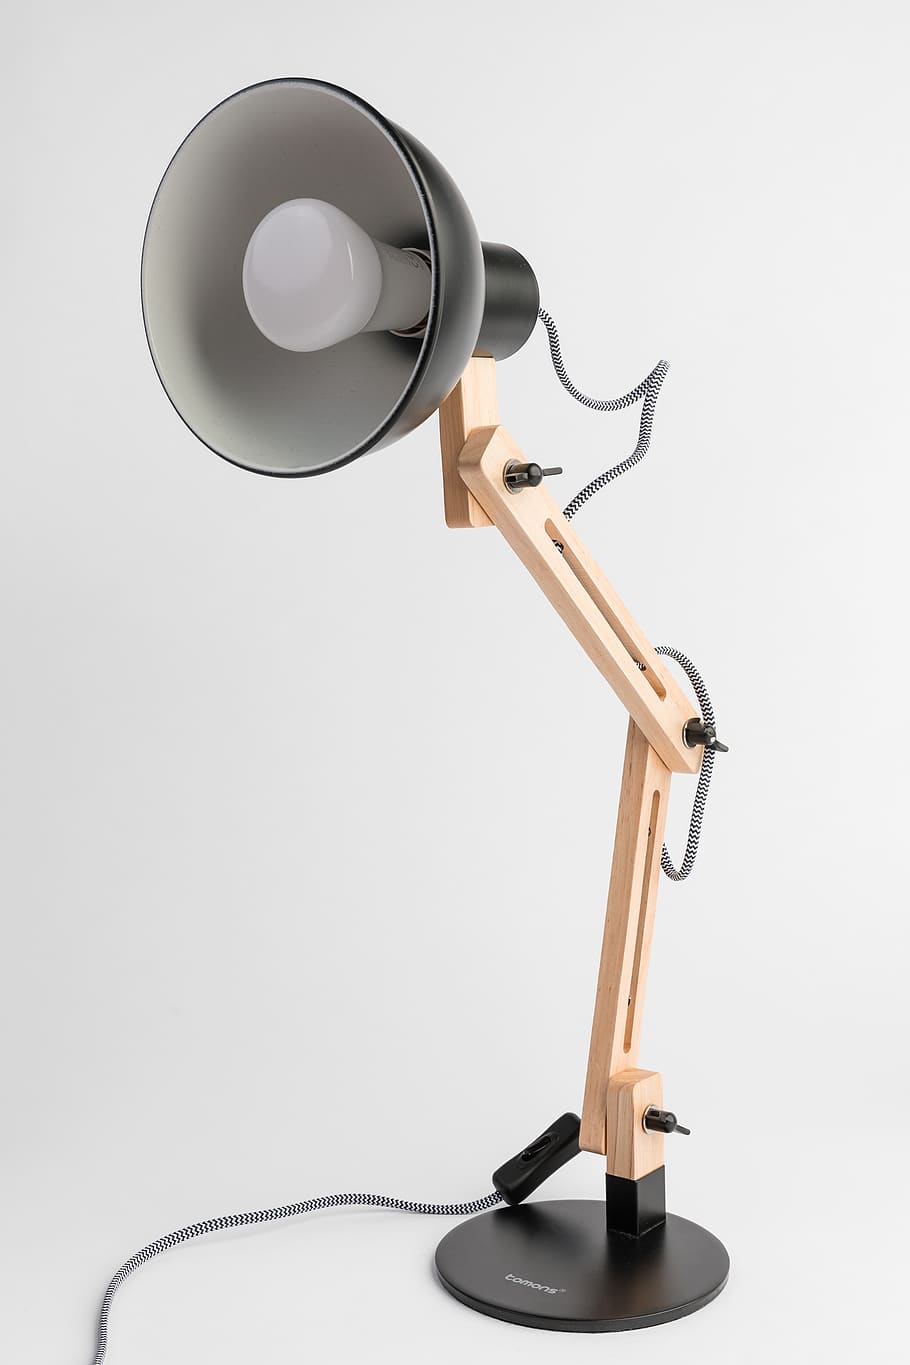 brown and black desk lamp on white surface, electronics, speaker